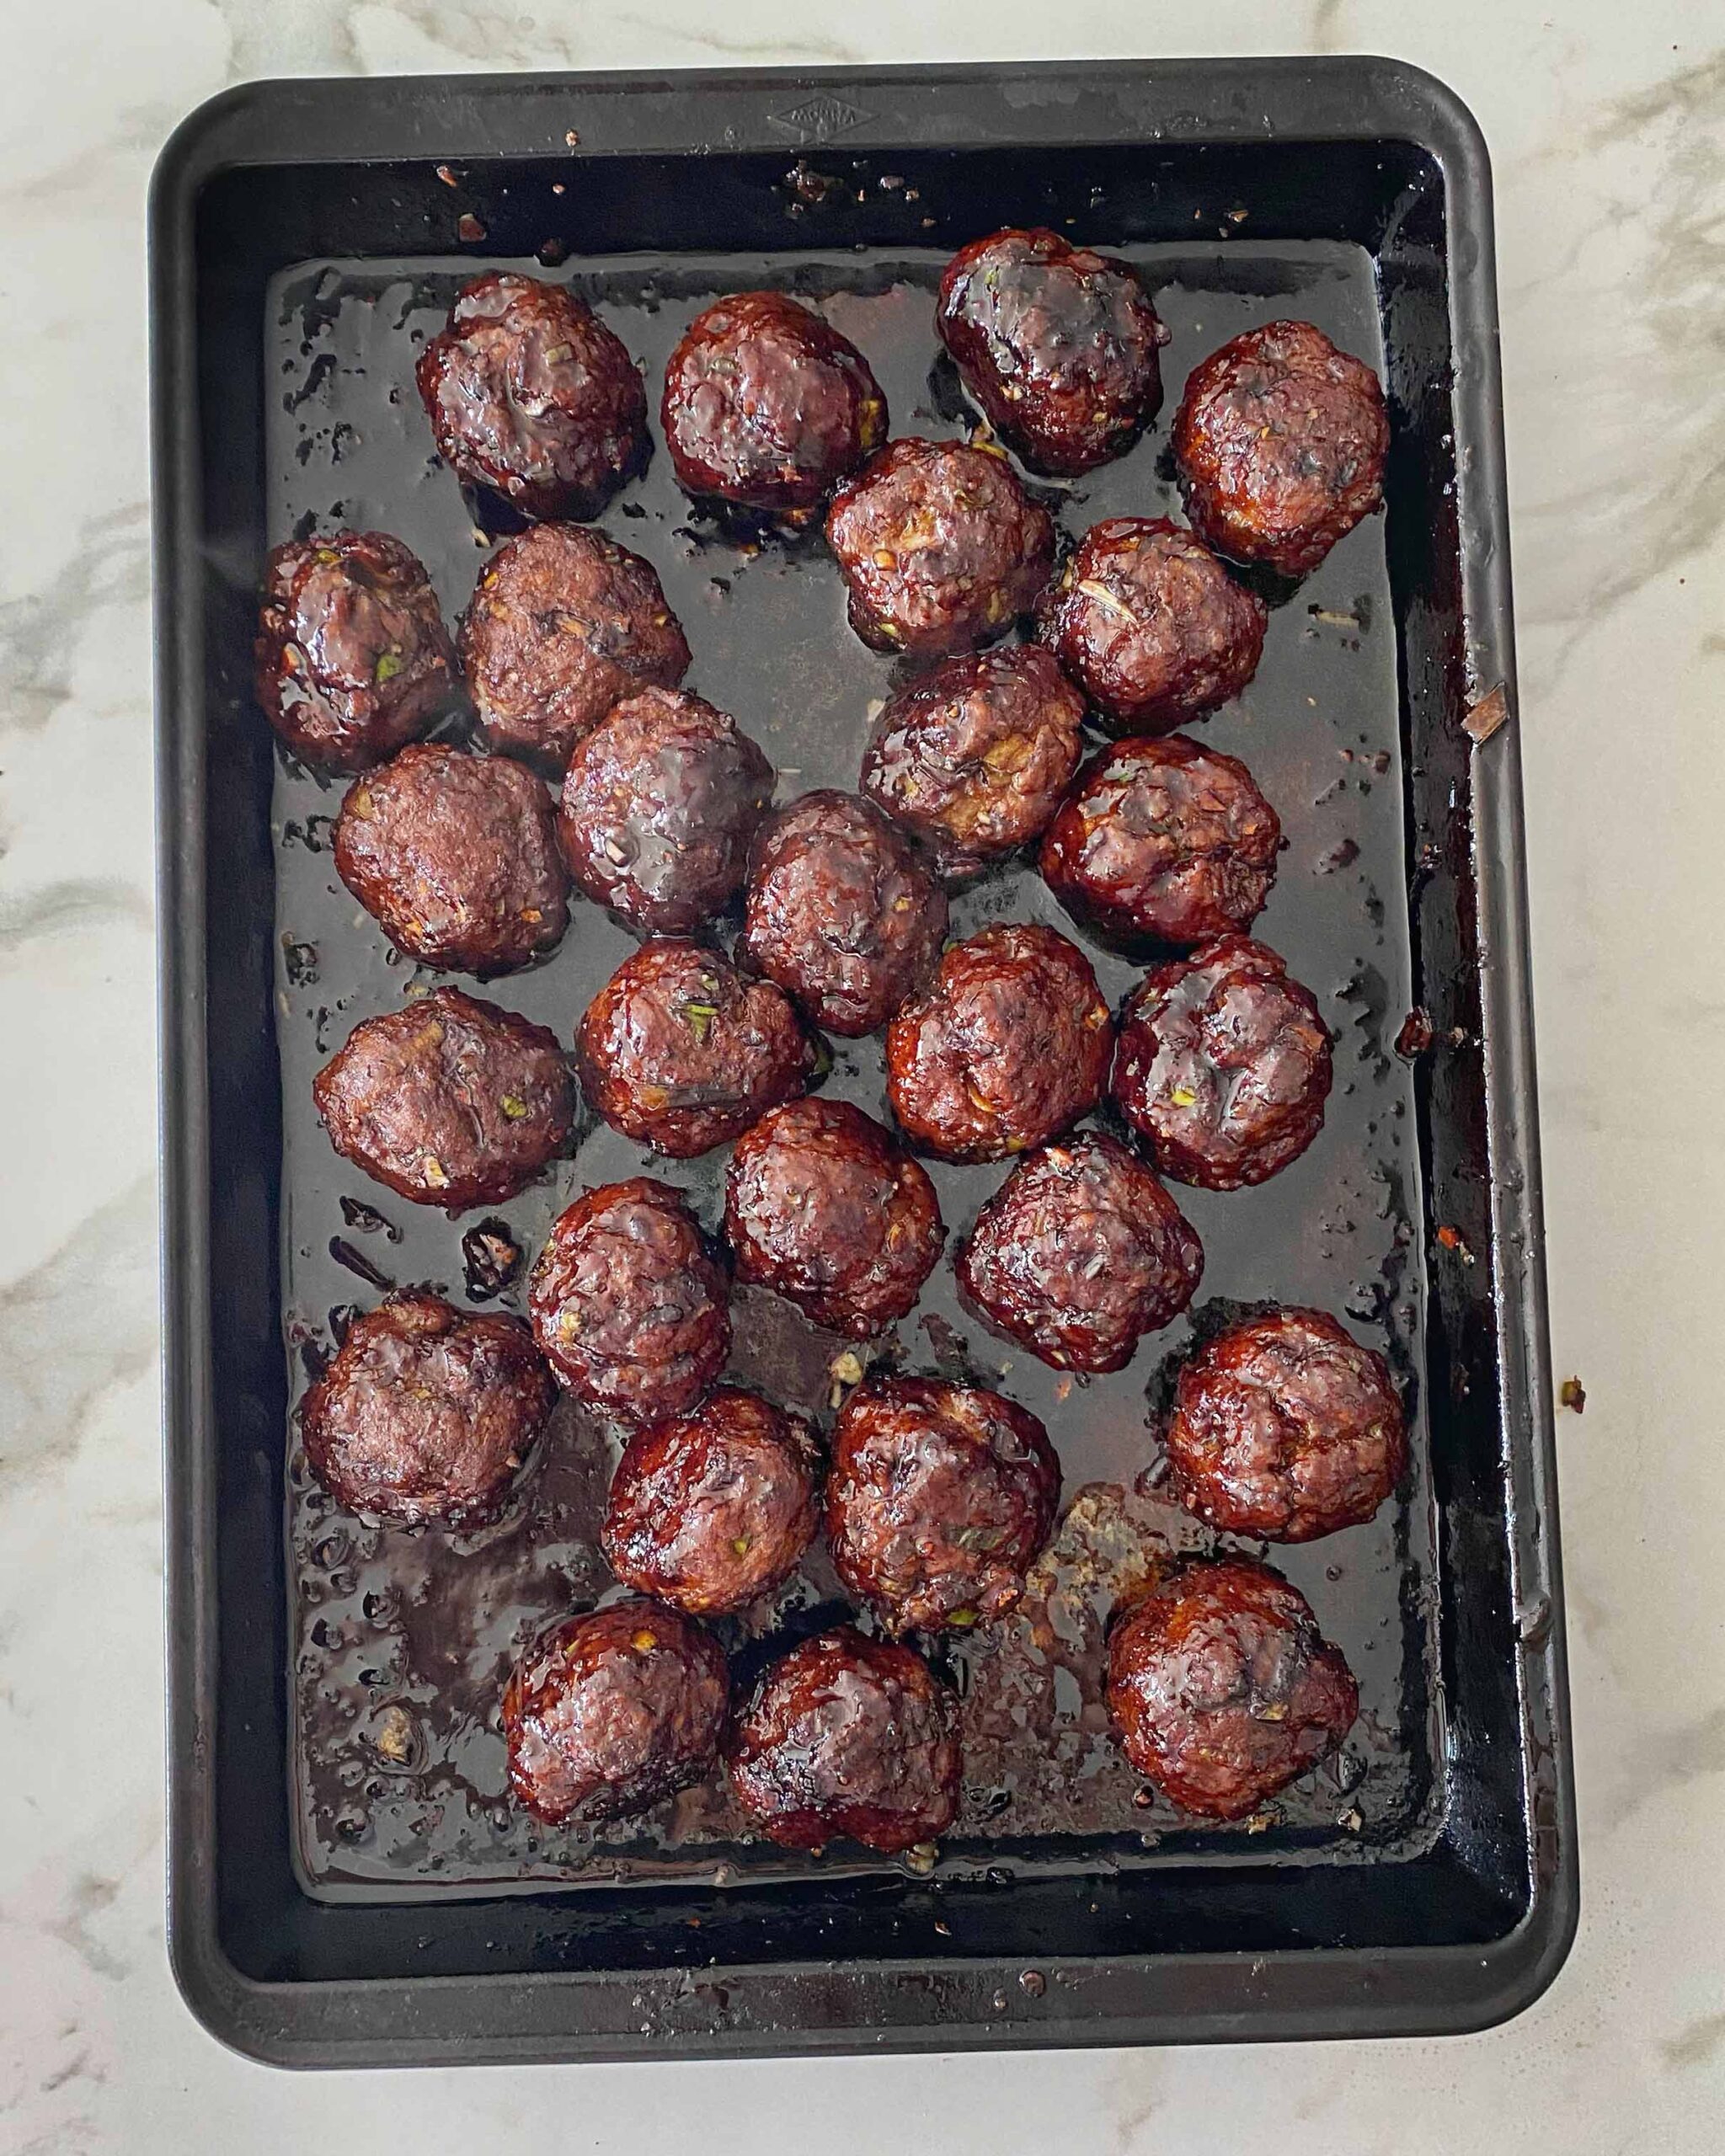 Baked meatballs on a baking tray.